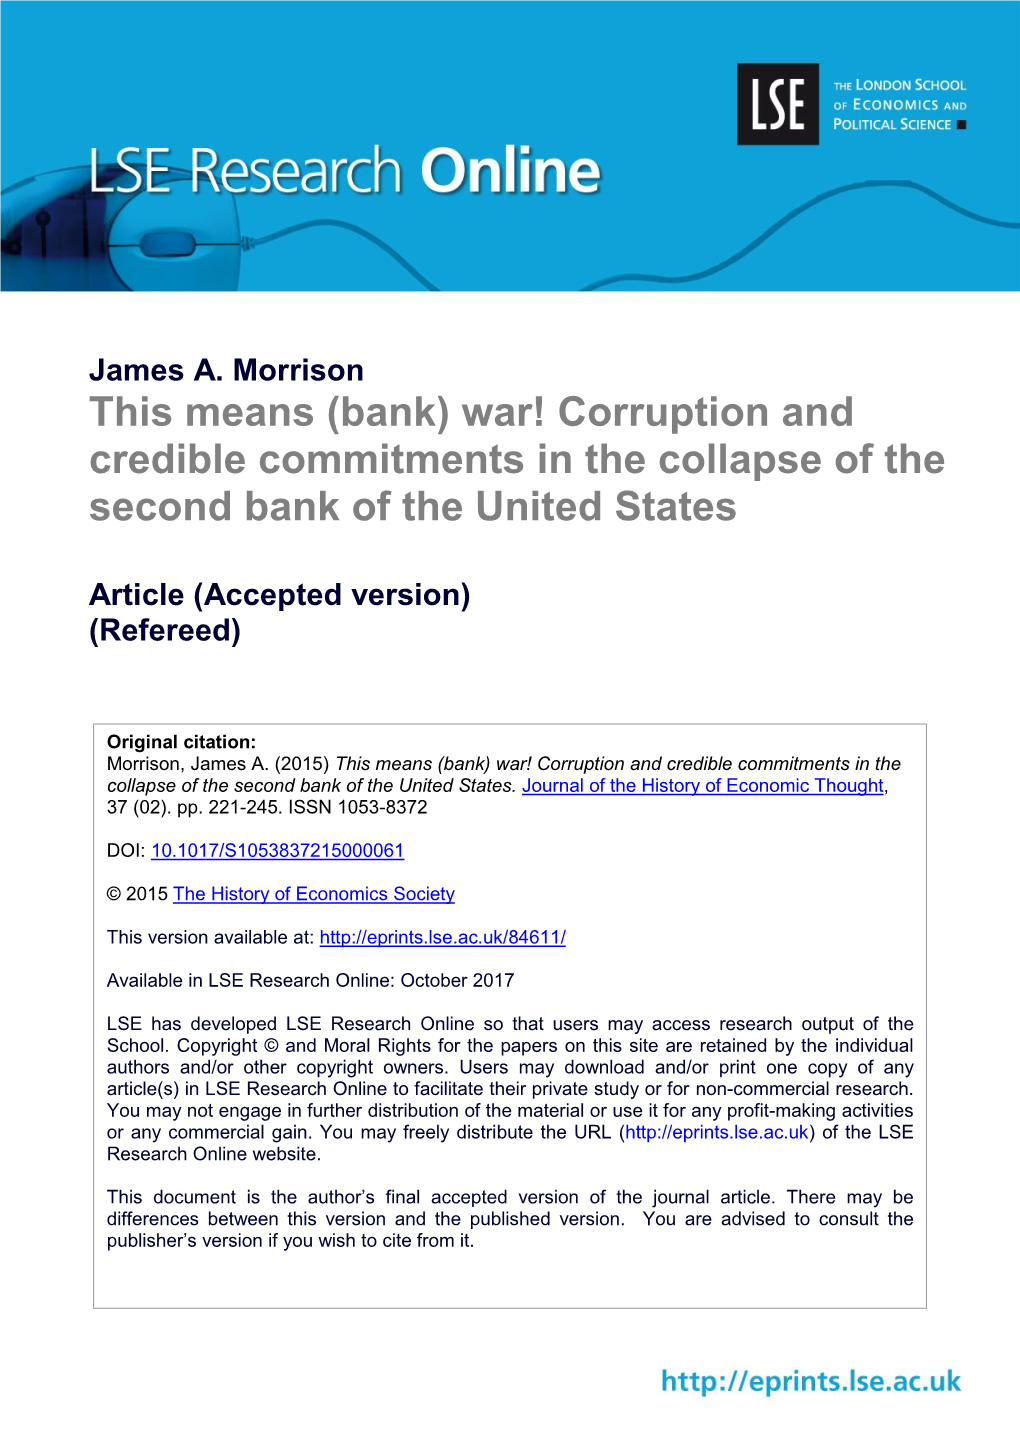 This Means (Bank) War! Corruption and Credible Commitments in the Collapse of the Second Bank of the United States